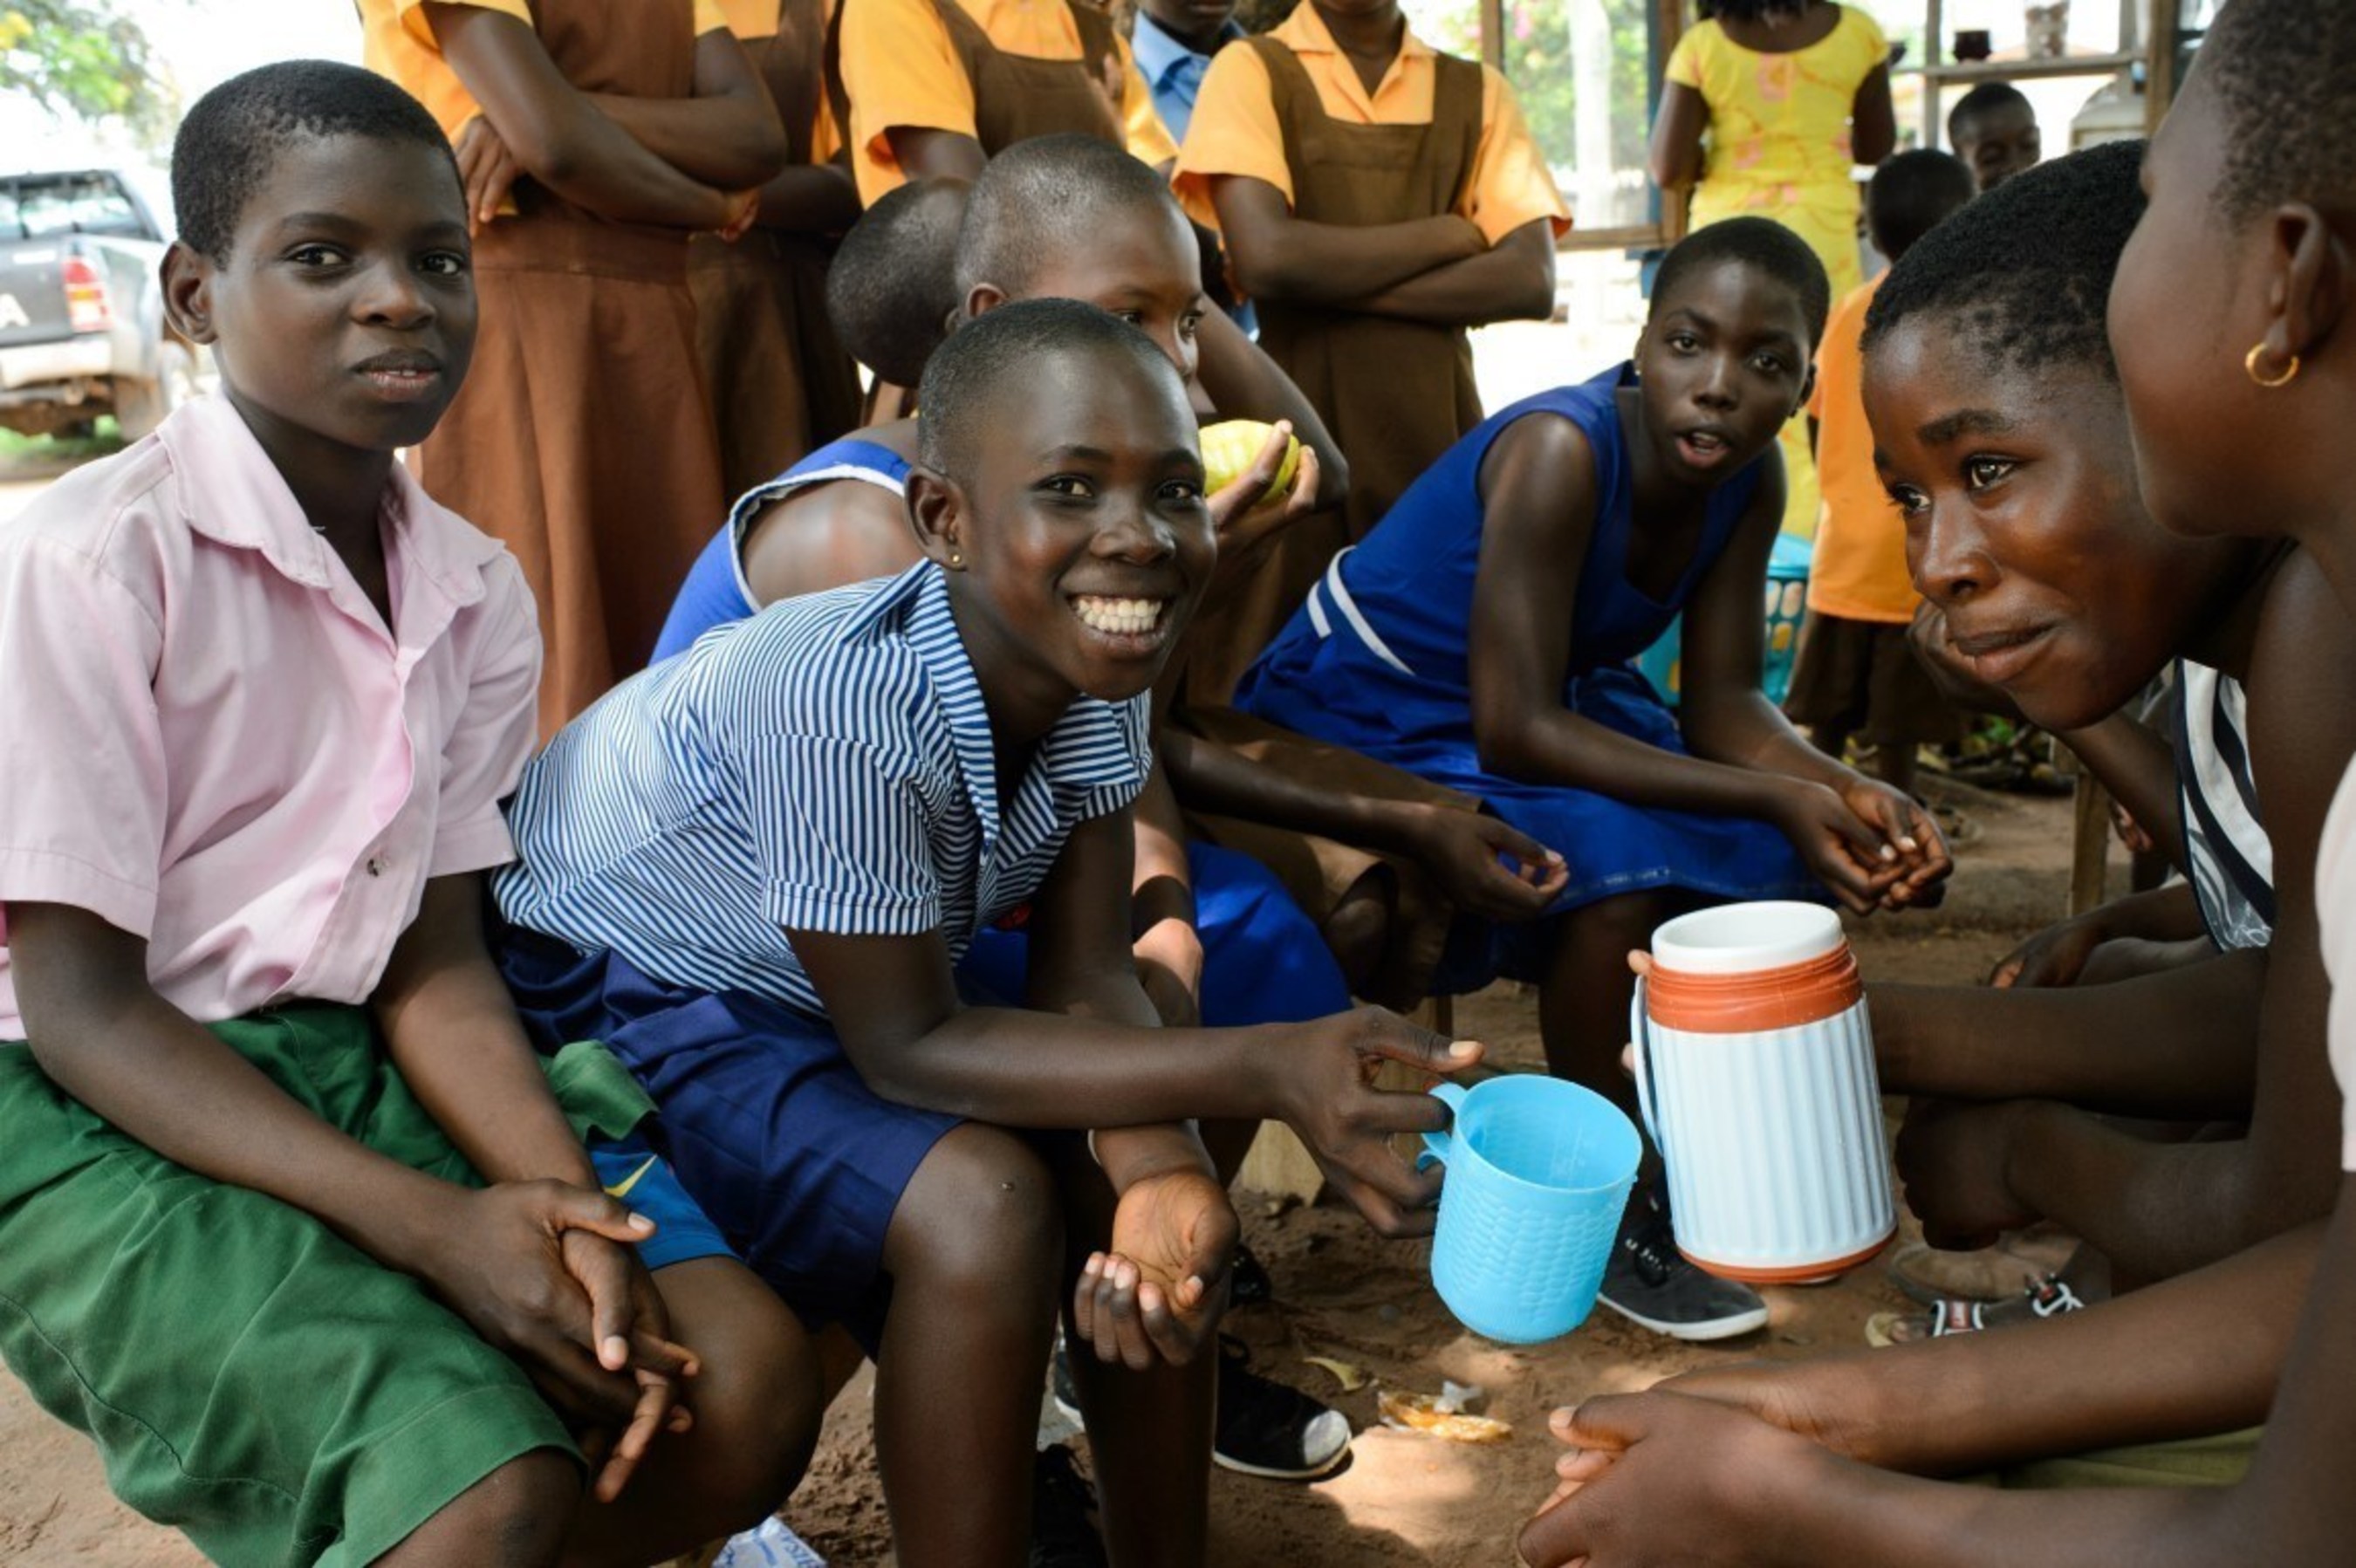 The new Safe Water strategy at the Conrad N. Hilton Foundation is in alignment with SDG 6. Within the new strategy, the Hilton Foundation aims to accelerate the coverage of reliable access to safe and affordable water services for households, health facilities and schools in Burkina Faso, Ethiopia, Ghana, Mali, Niger and Uganda.